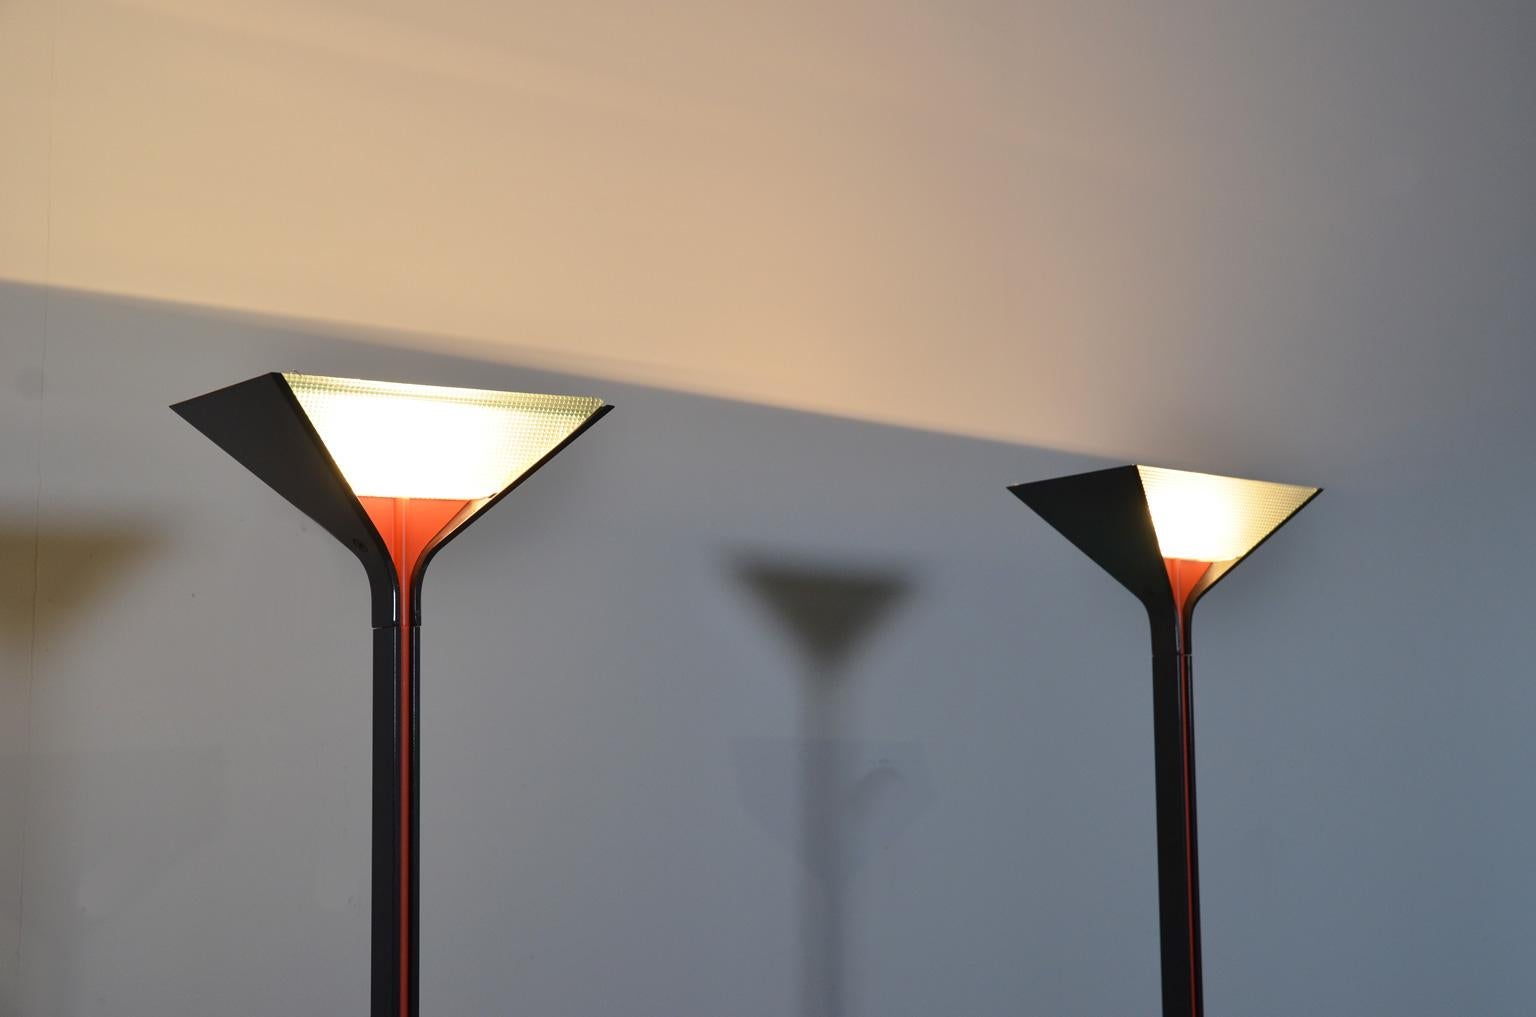 Design by the Italian designers Afra and Tobia Scarpa. Their uplighter Papillona is available in different colors. This one comes in a combination of red and black. The lamp gives a perfect, upwards, diffuse light.